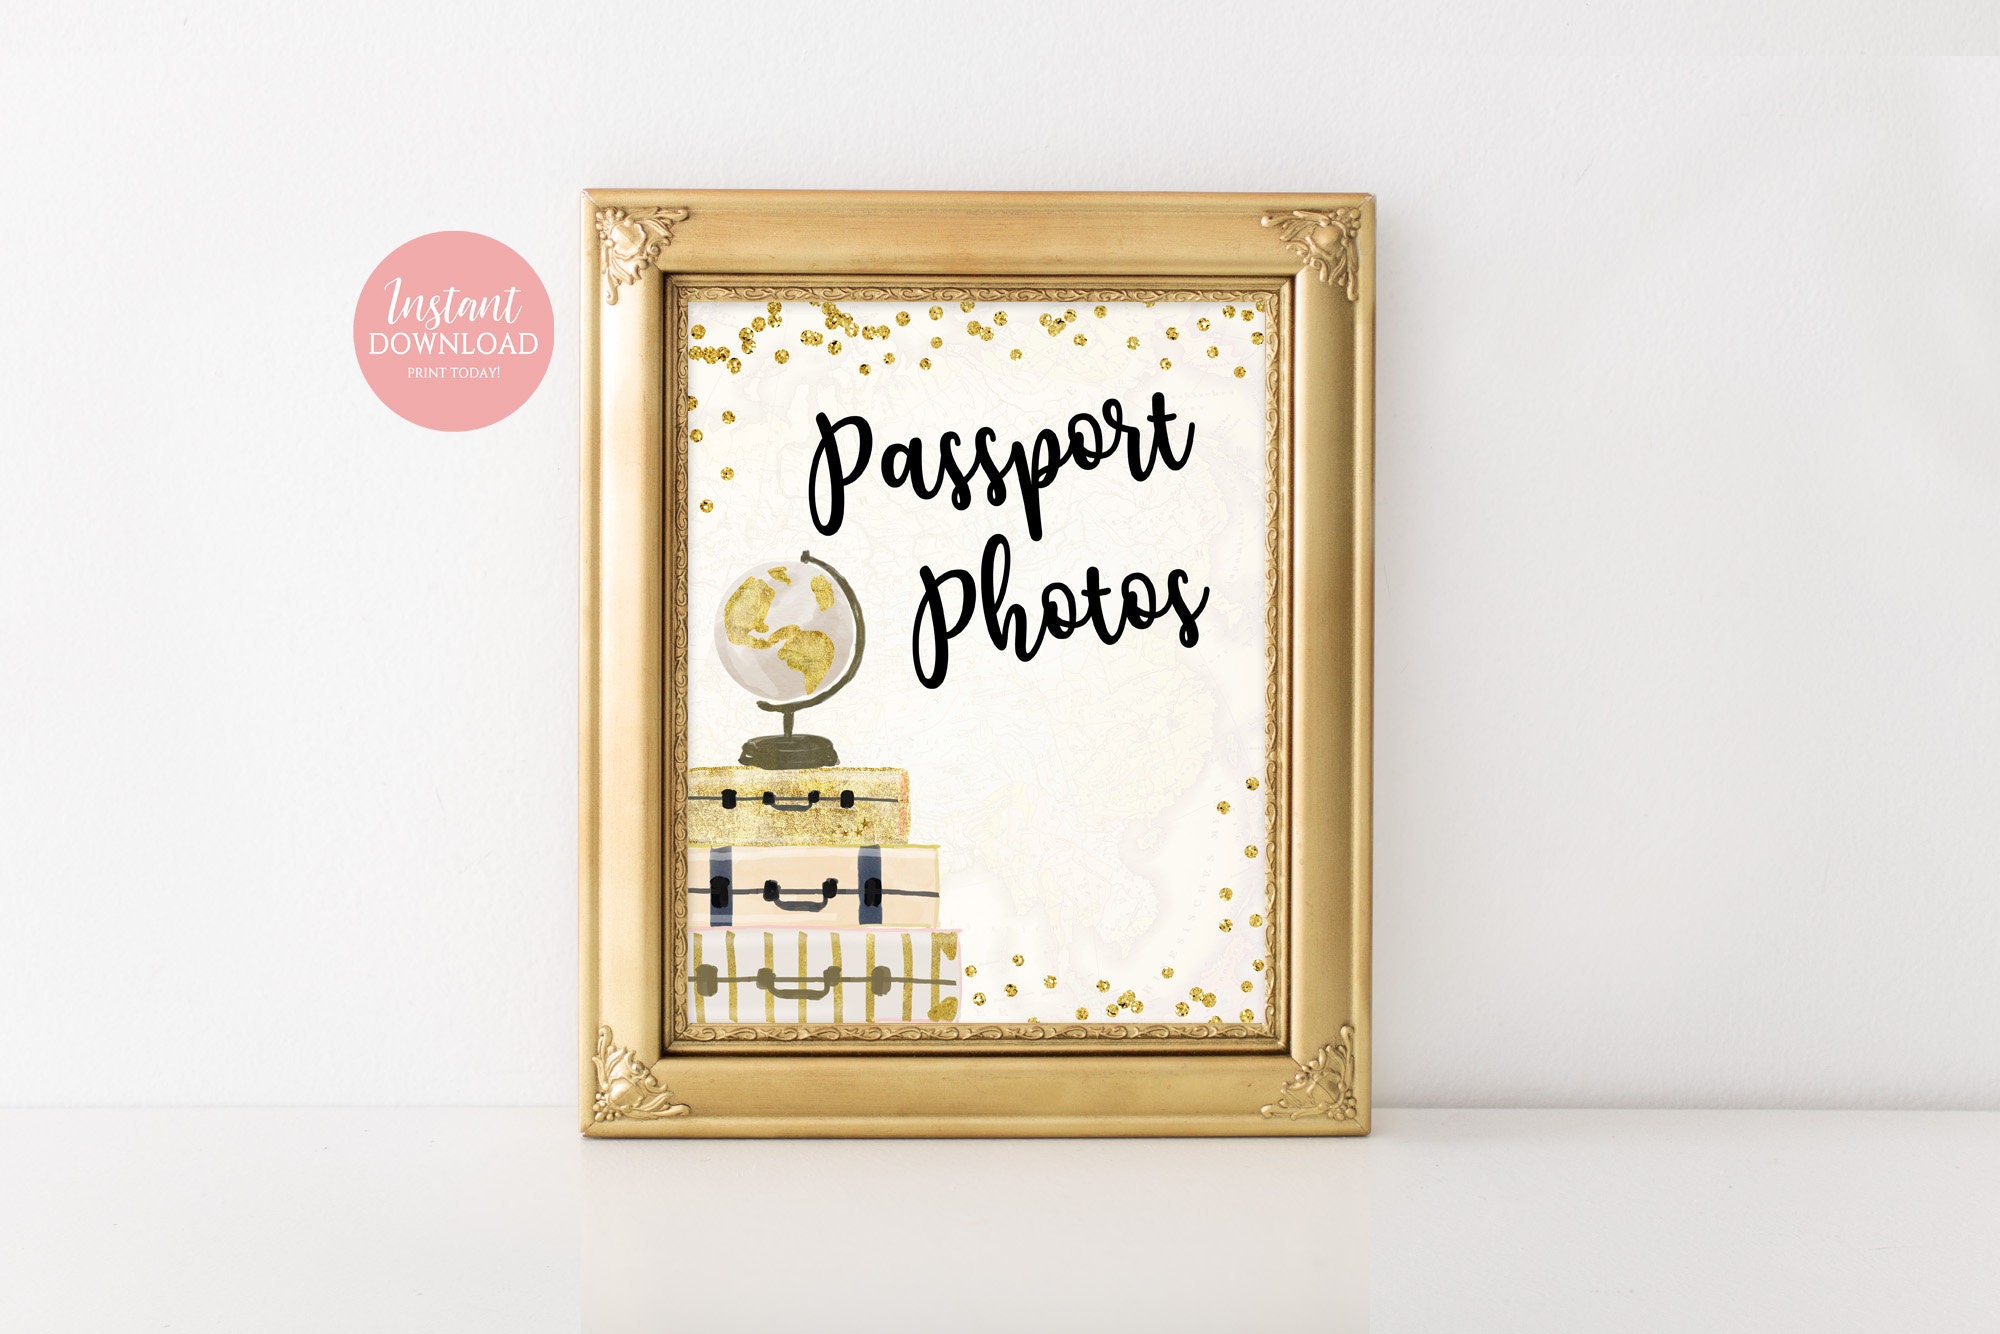 Picture Frame Mini Photo Frame Small Passport Photo Passport Photo Heart  With Engraving Portrait Silver Metal 4 X 5 Cm Heart Shape Friends Frame  Photo Picture Elegant 